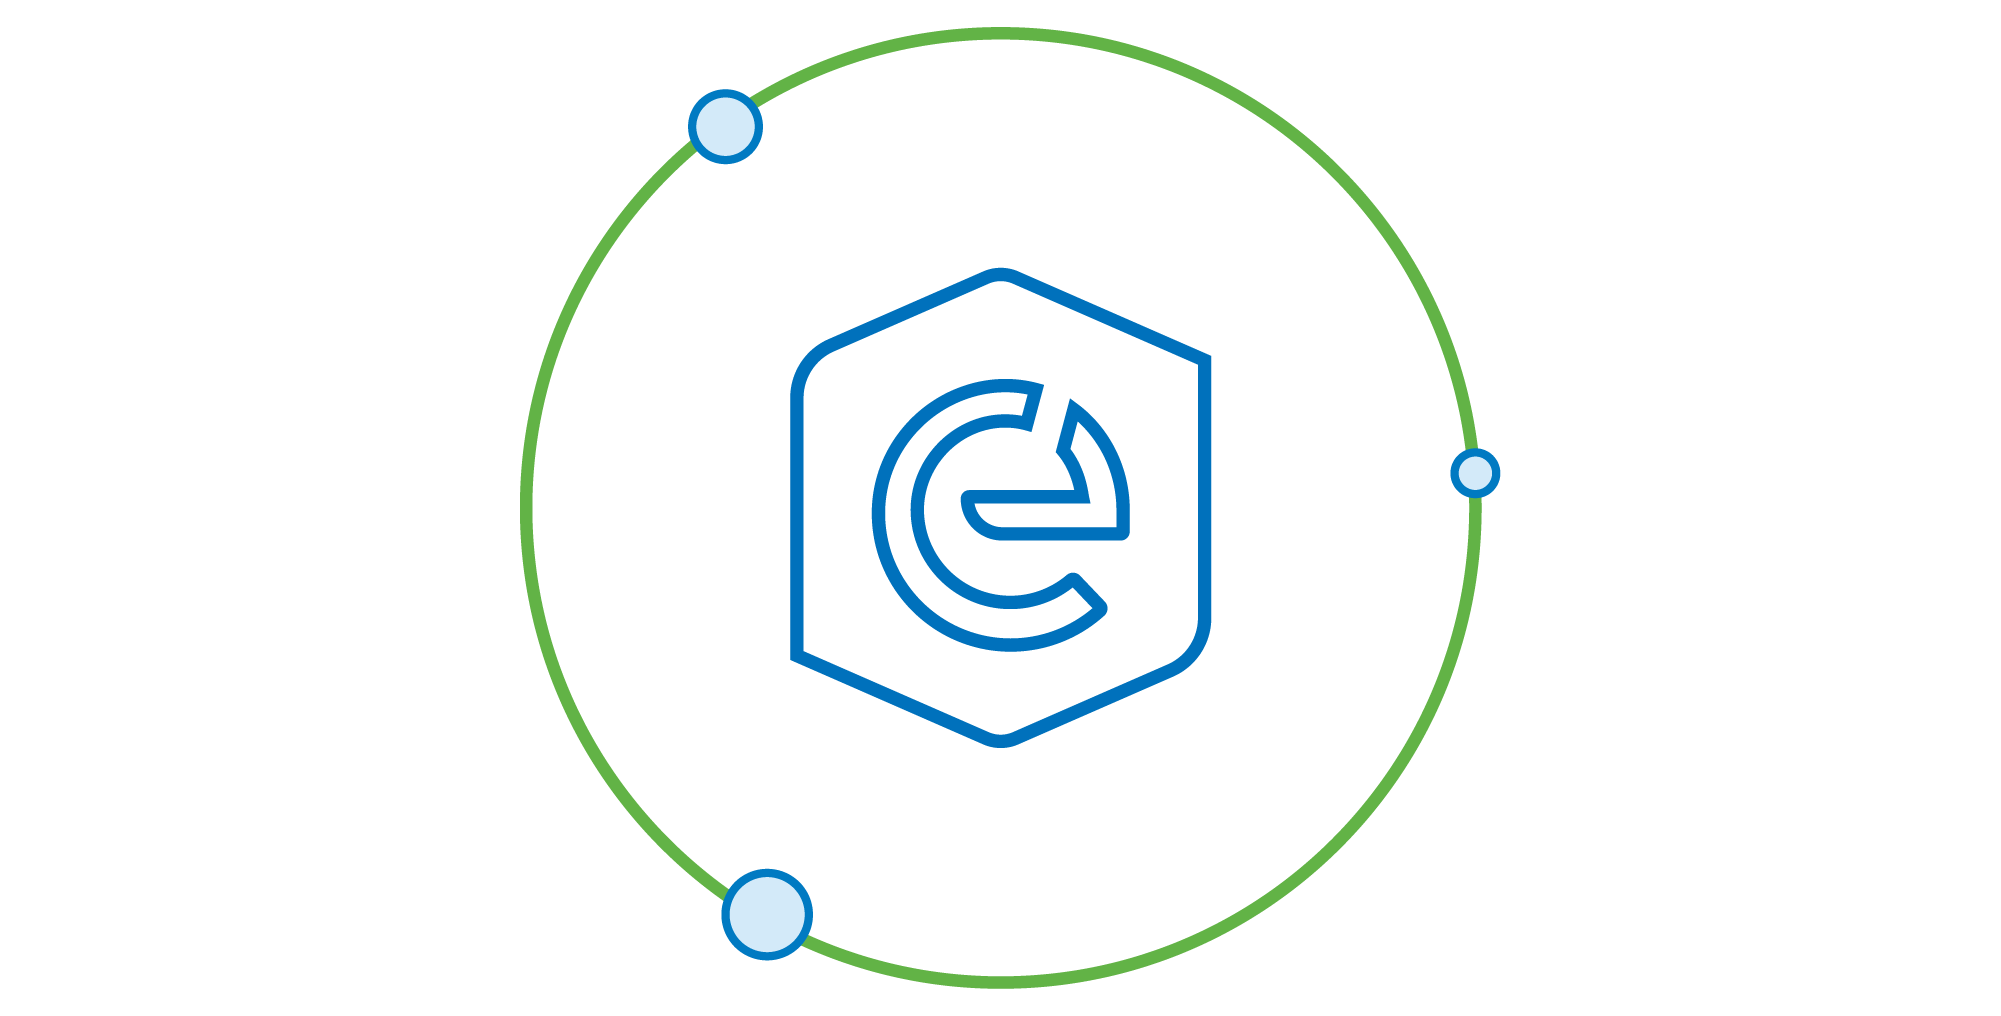 An illustration of three people and the Esri Community symbol connected to the people with a line